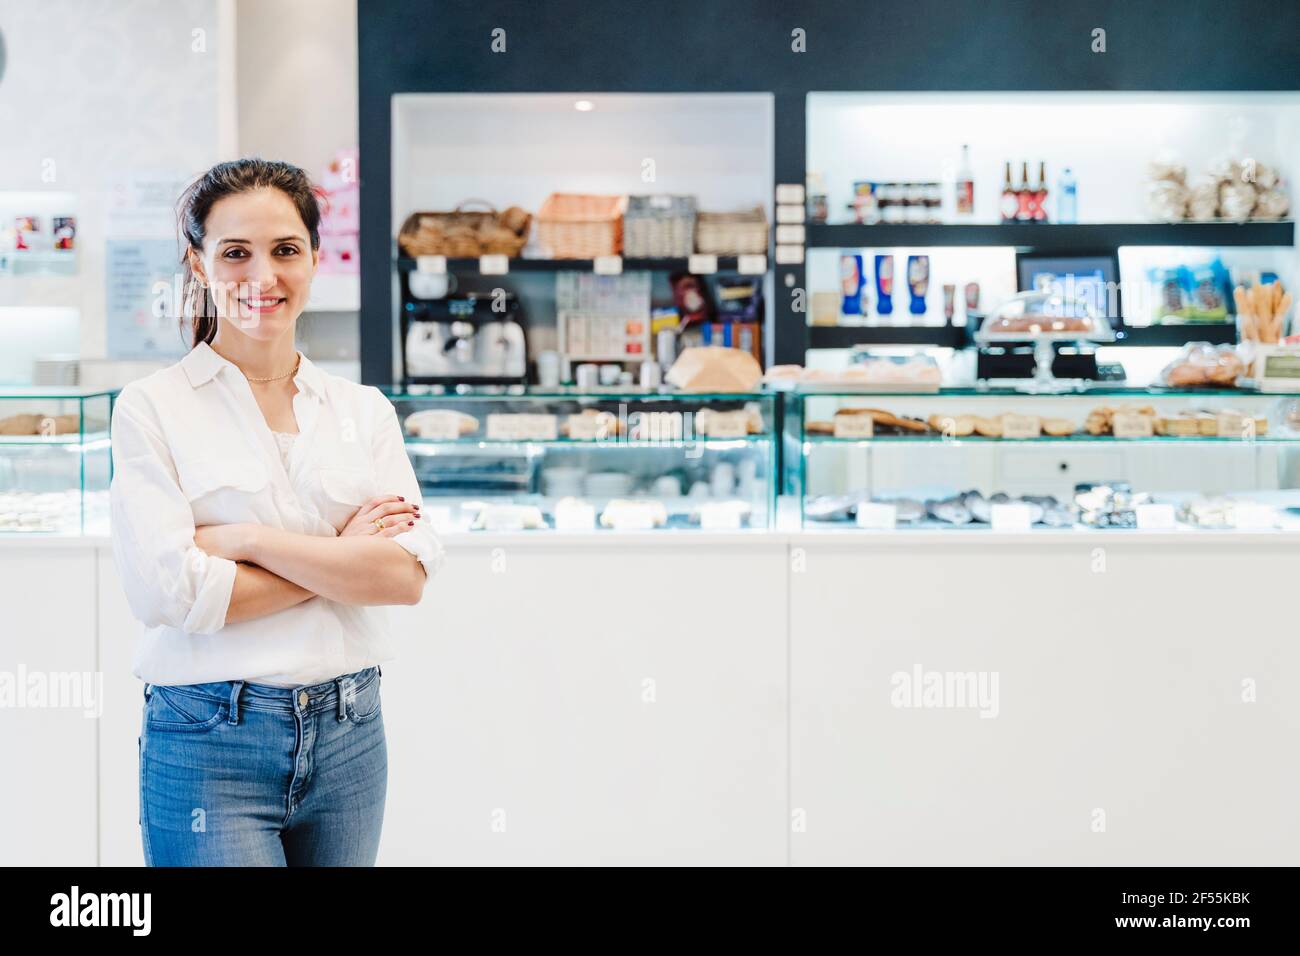 Female bakery owner standing arms crossed against display case Stock Photo